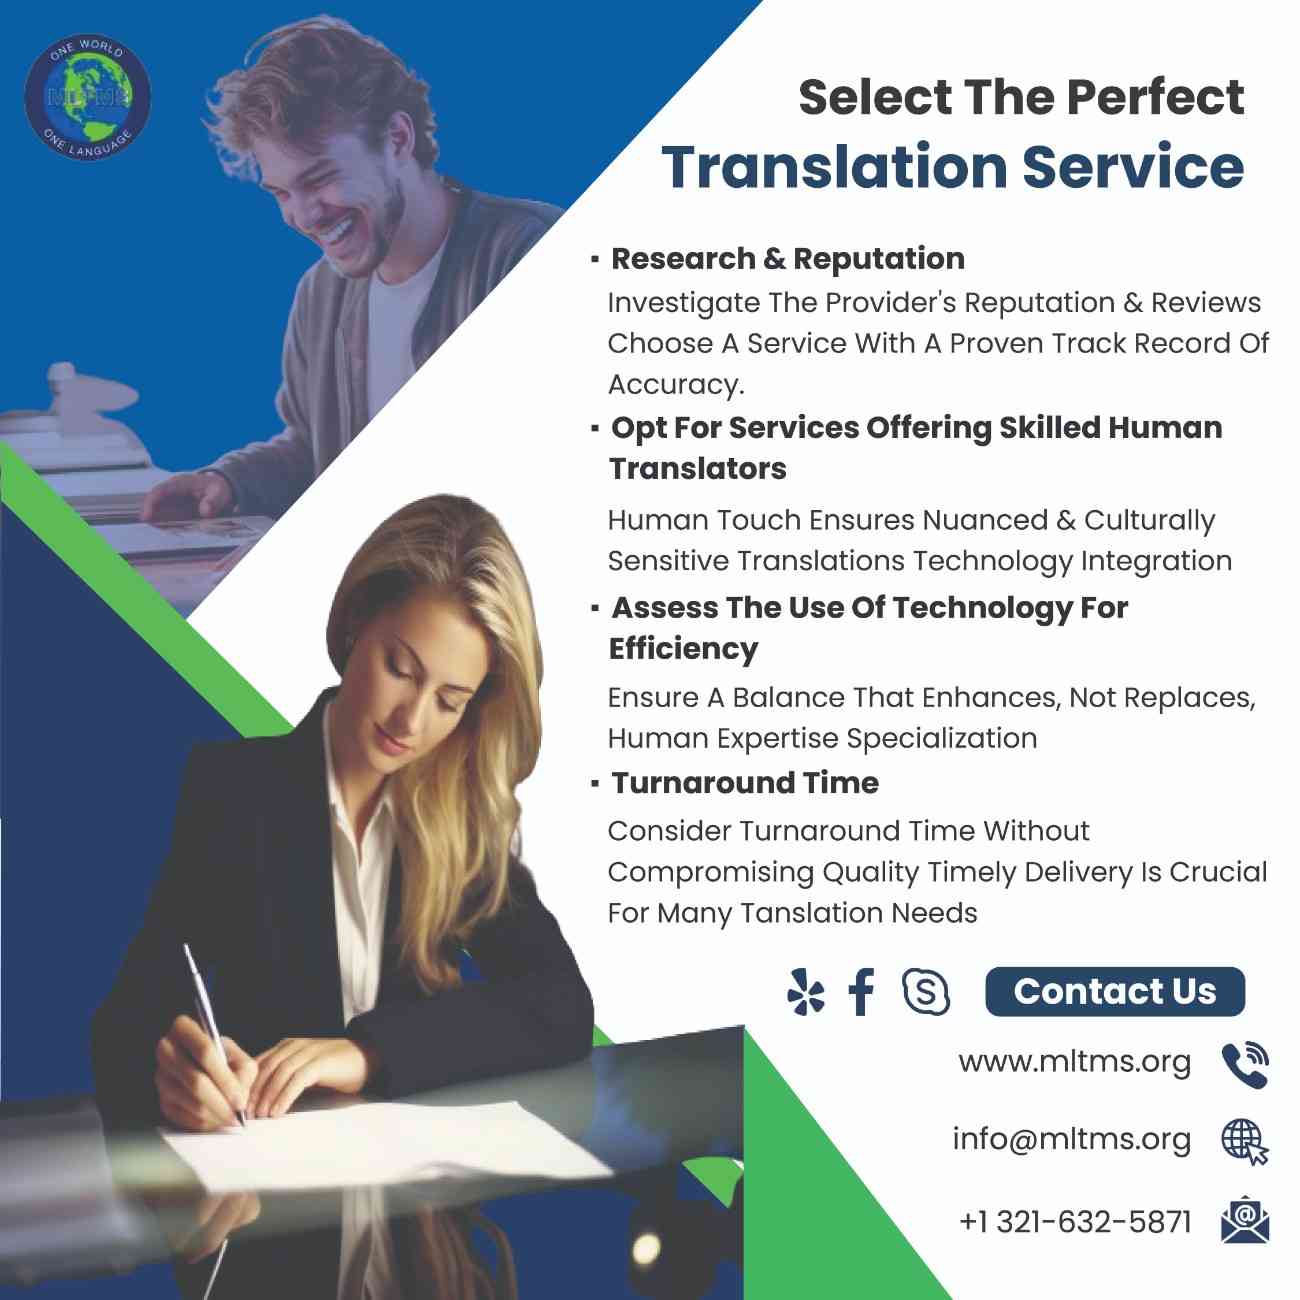 Select The Perfect Translation Service